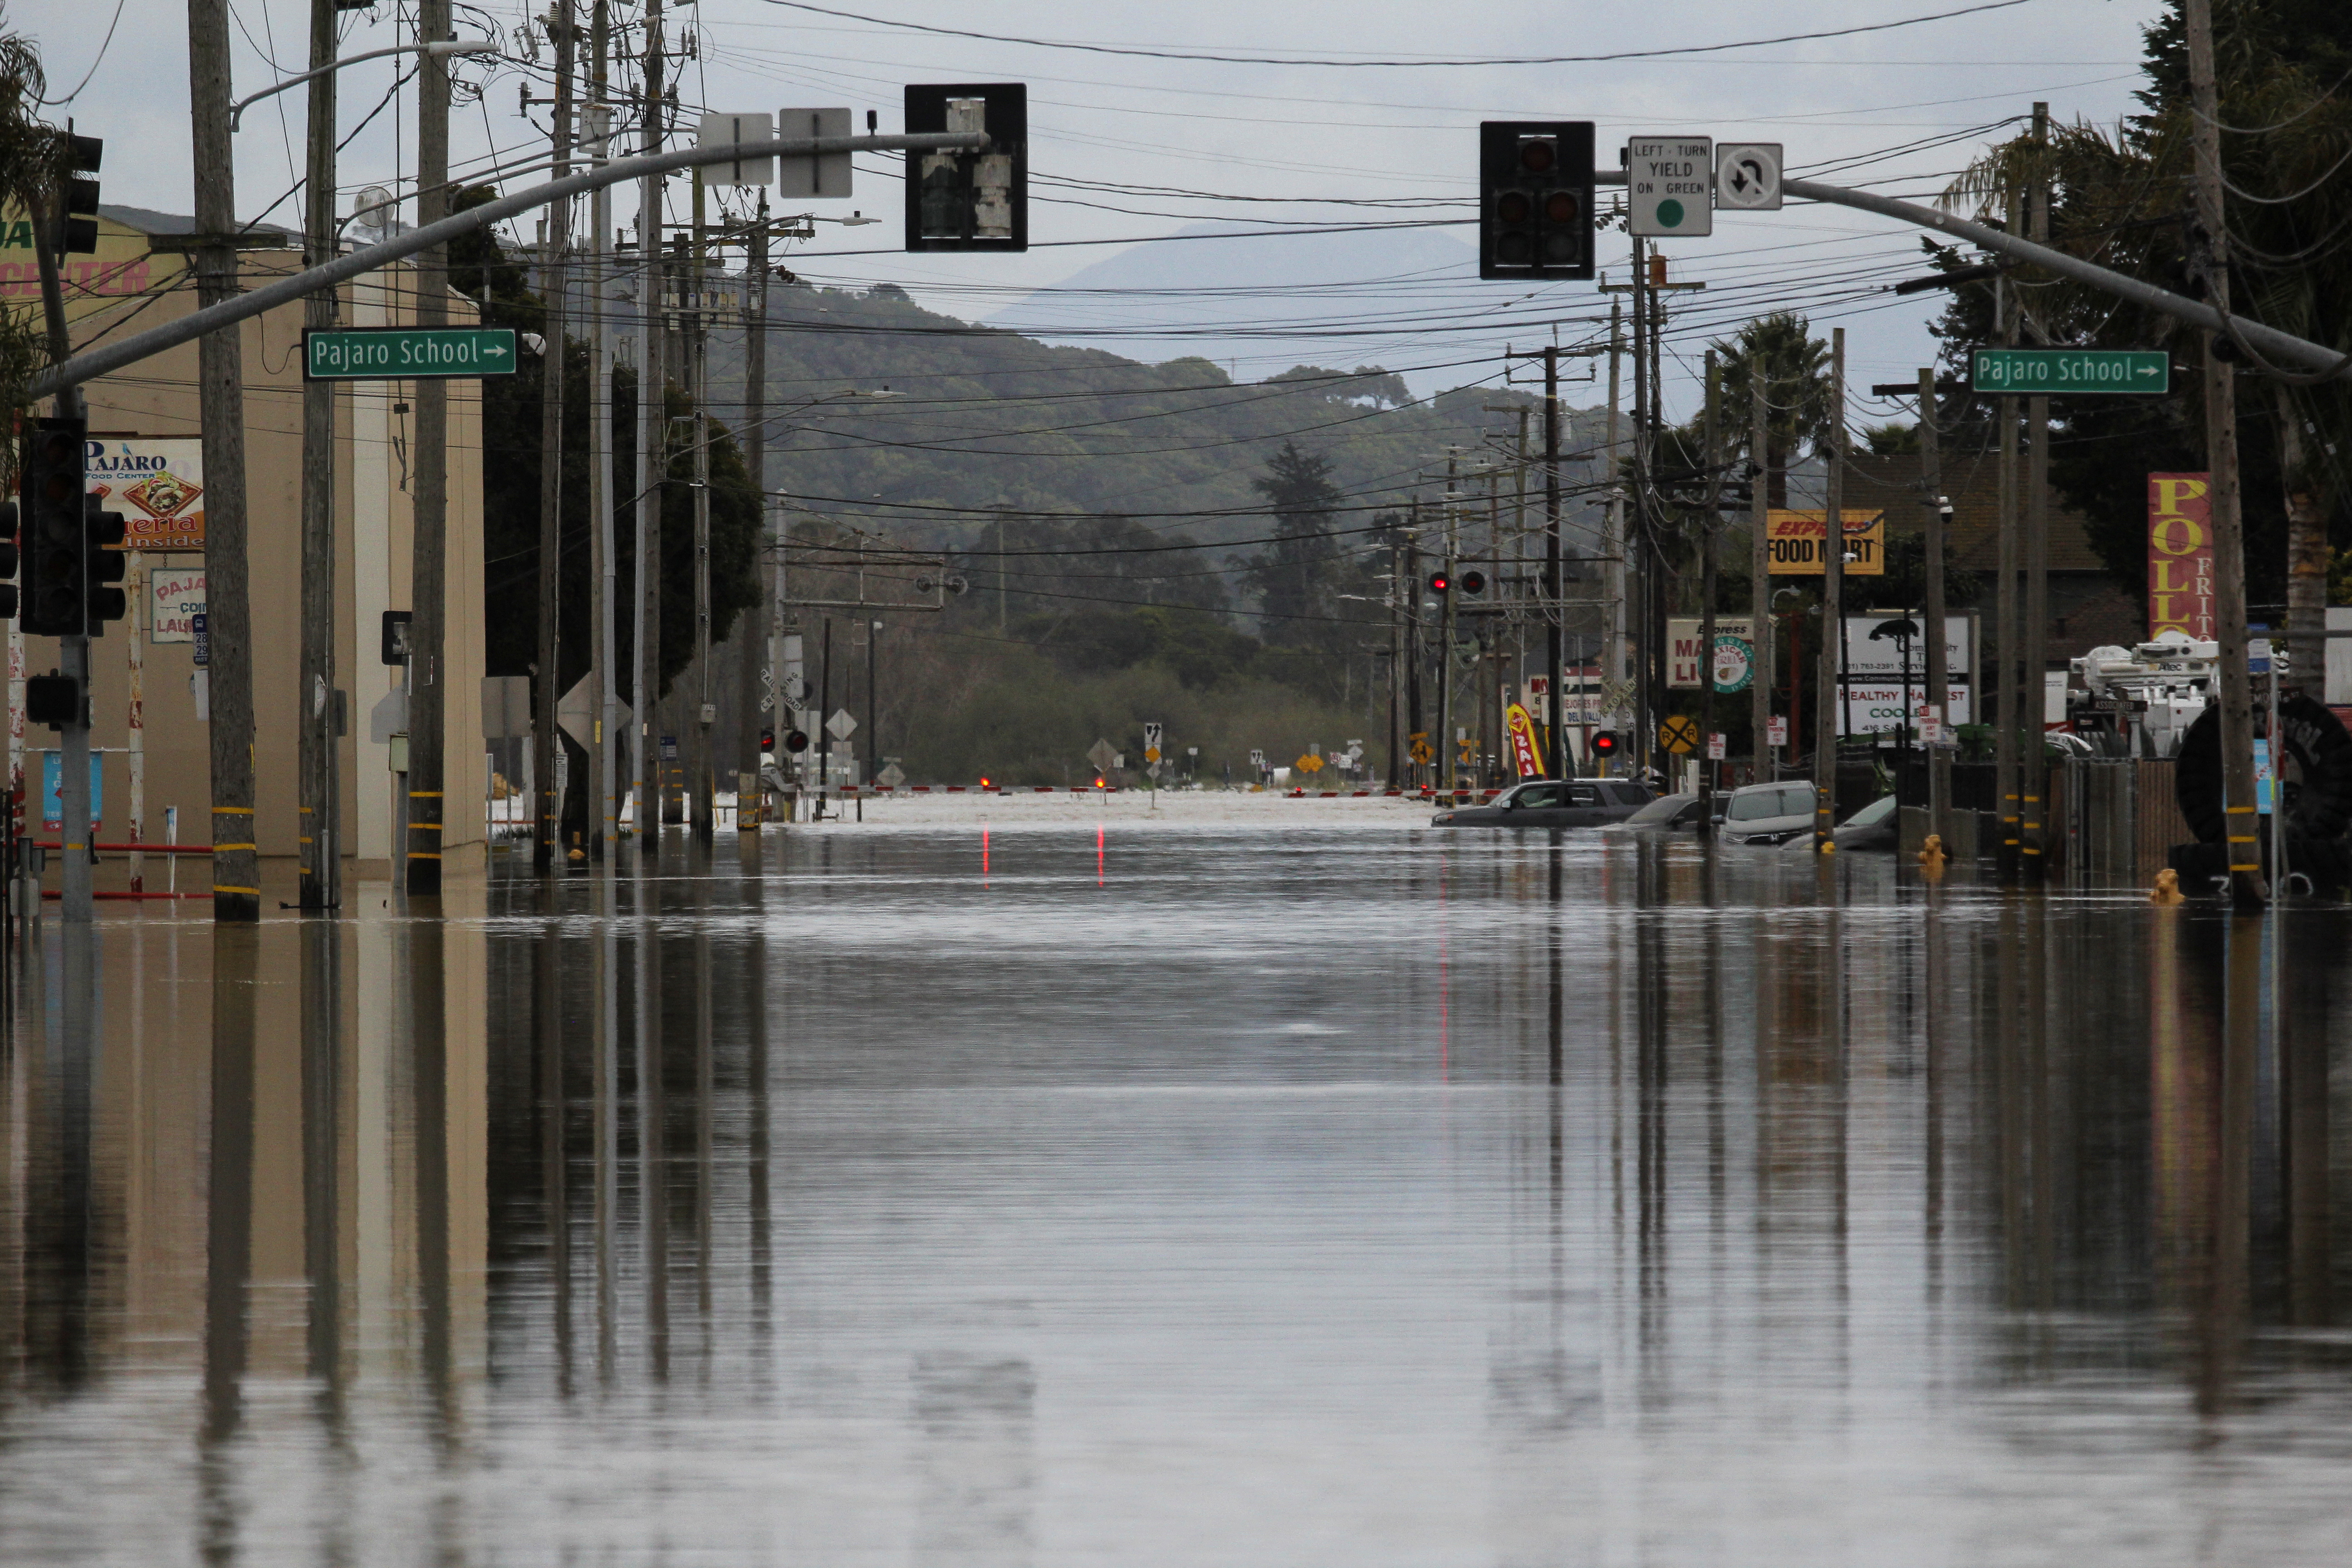 Floodwaters still inundating the central California town of Pajaro